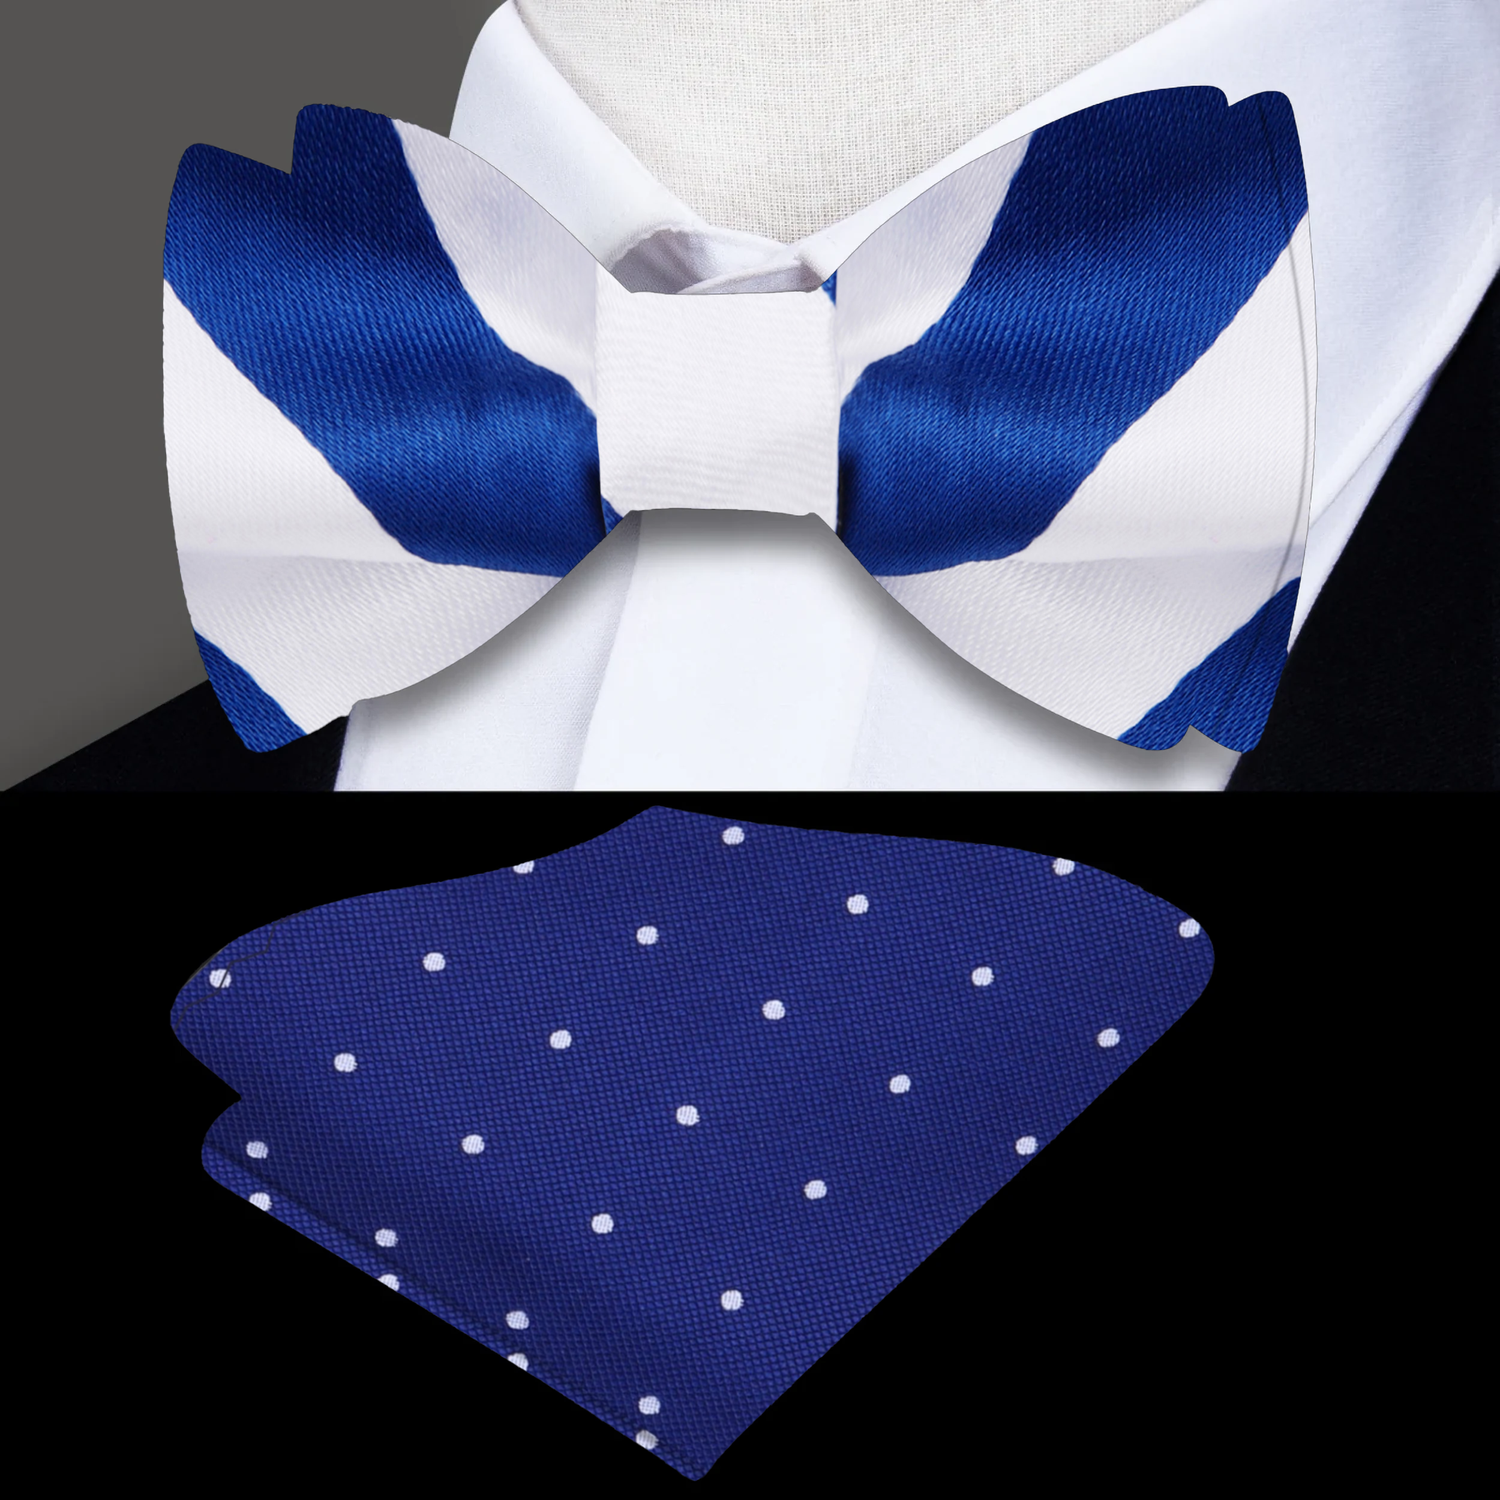 White and Blue Stripe Bow Tie and Accenting Blue White Polka Square